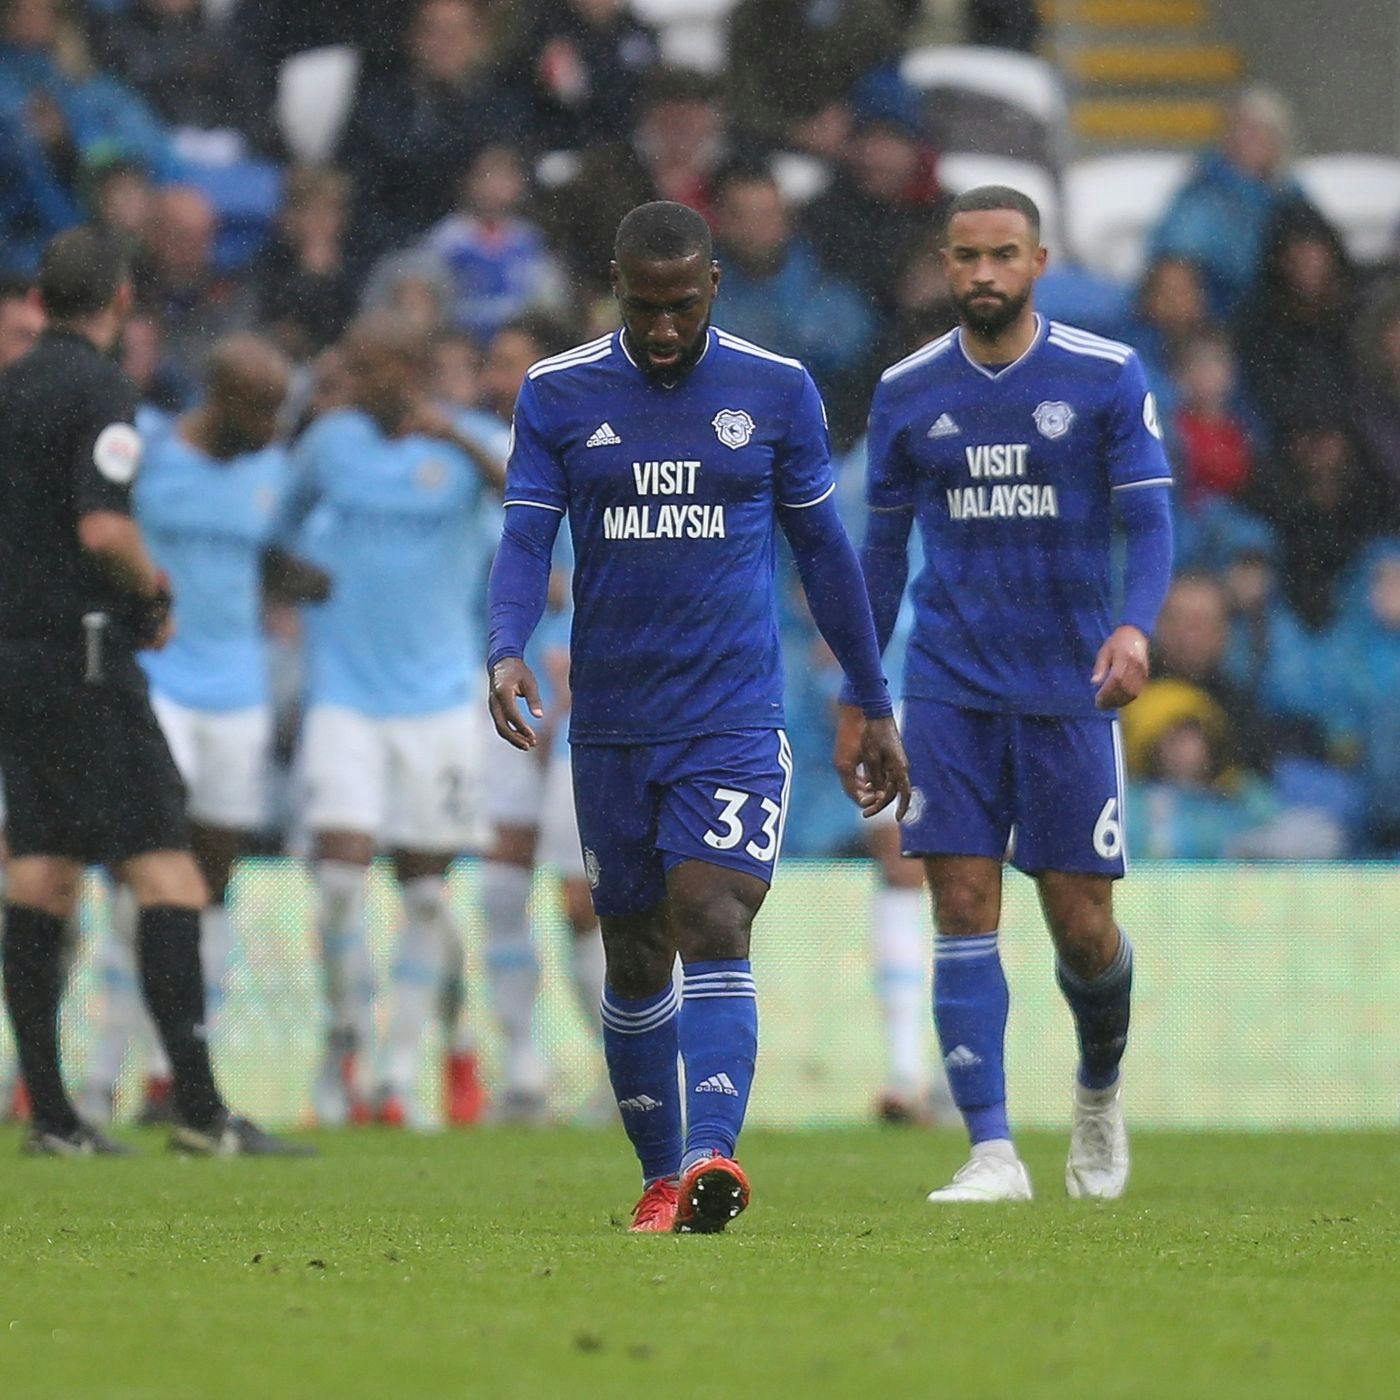 It’s time to change tactics if Cardiff want to stay up